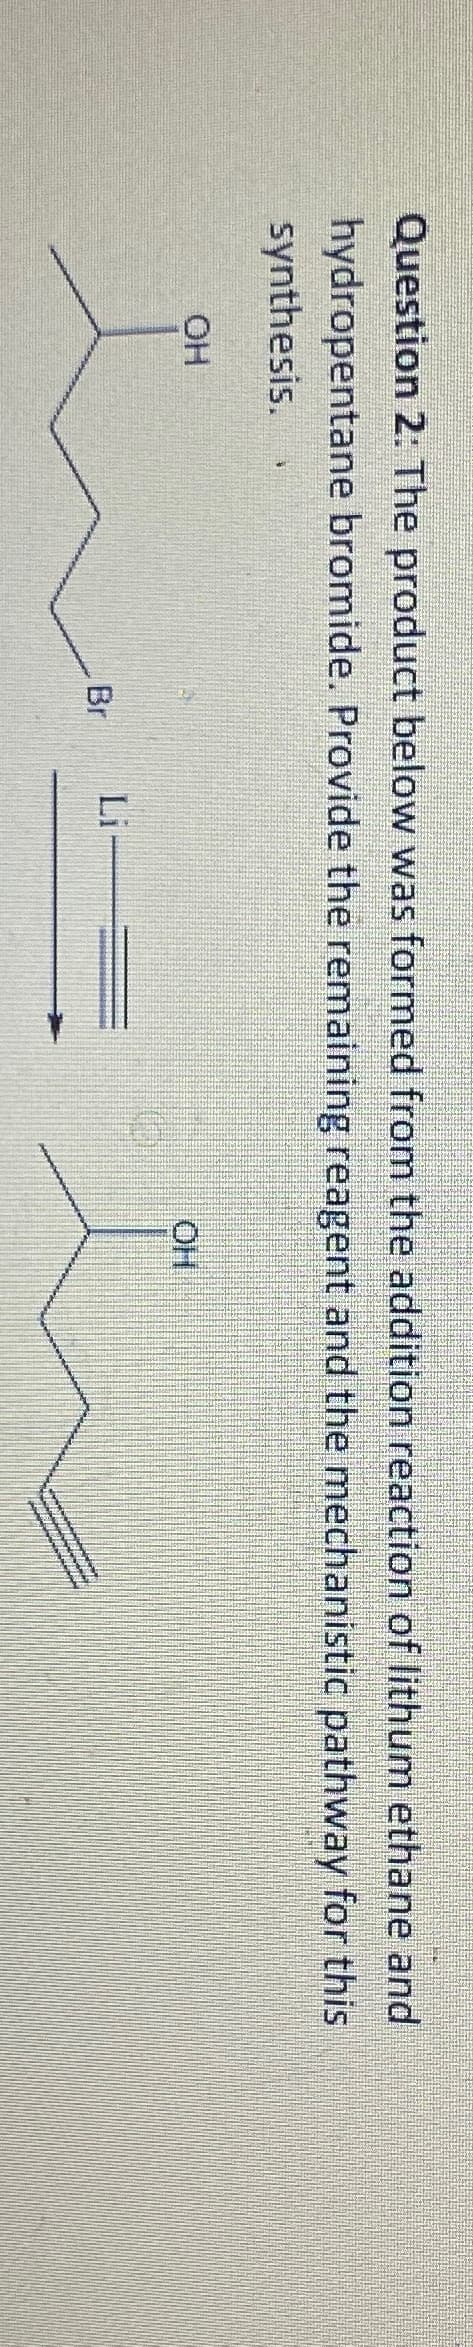 Question 2: The product below was formed from the addition reaction of lithum ethane and
hydropentane bromide. Provide the remaining reagent and the mechanistic pathway for this
synthesis.
OH
Br
Li
OH